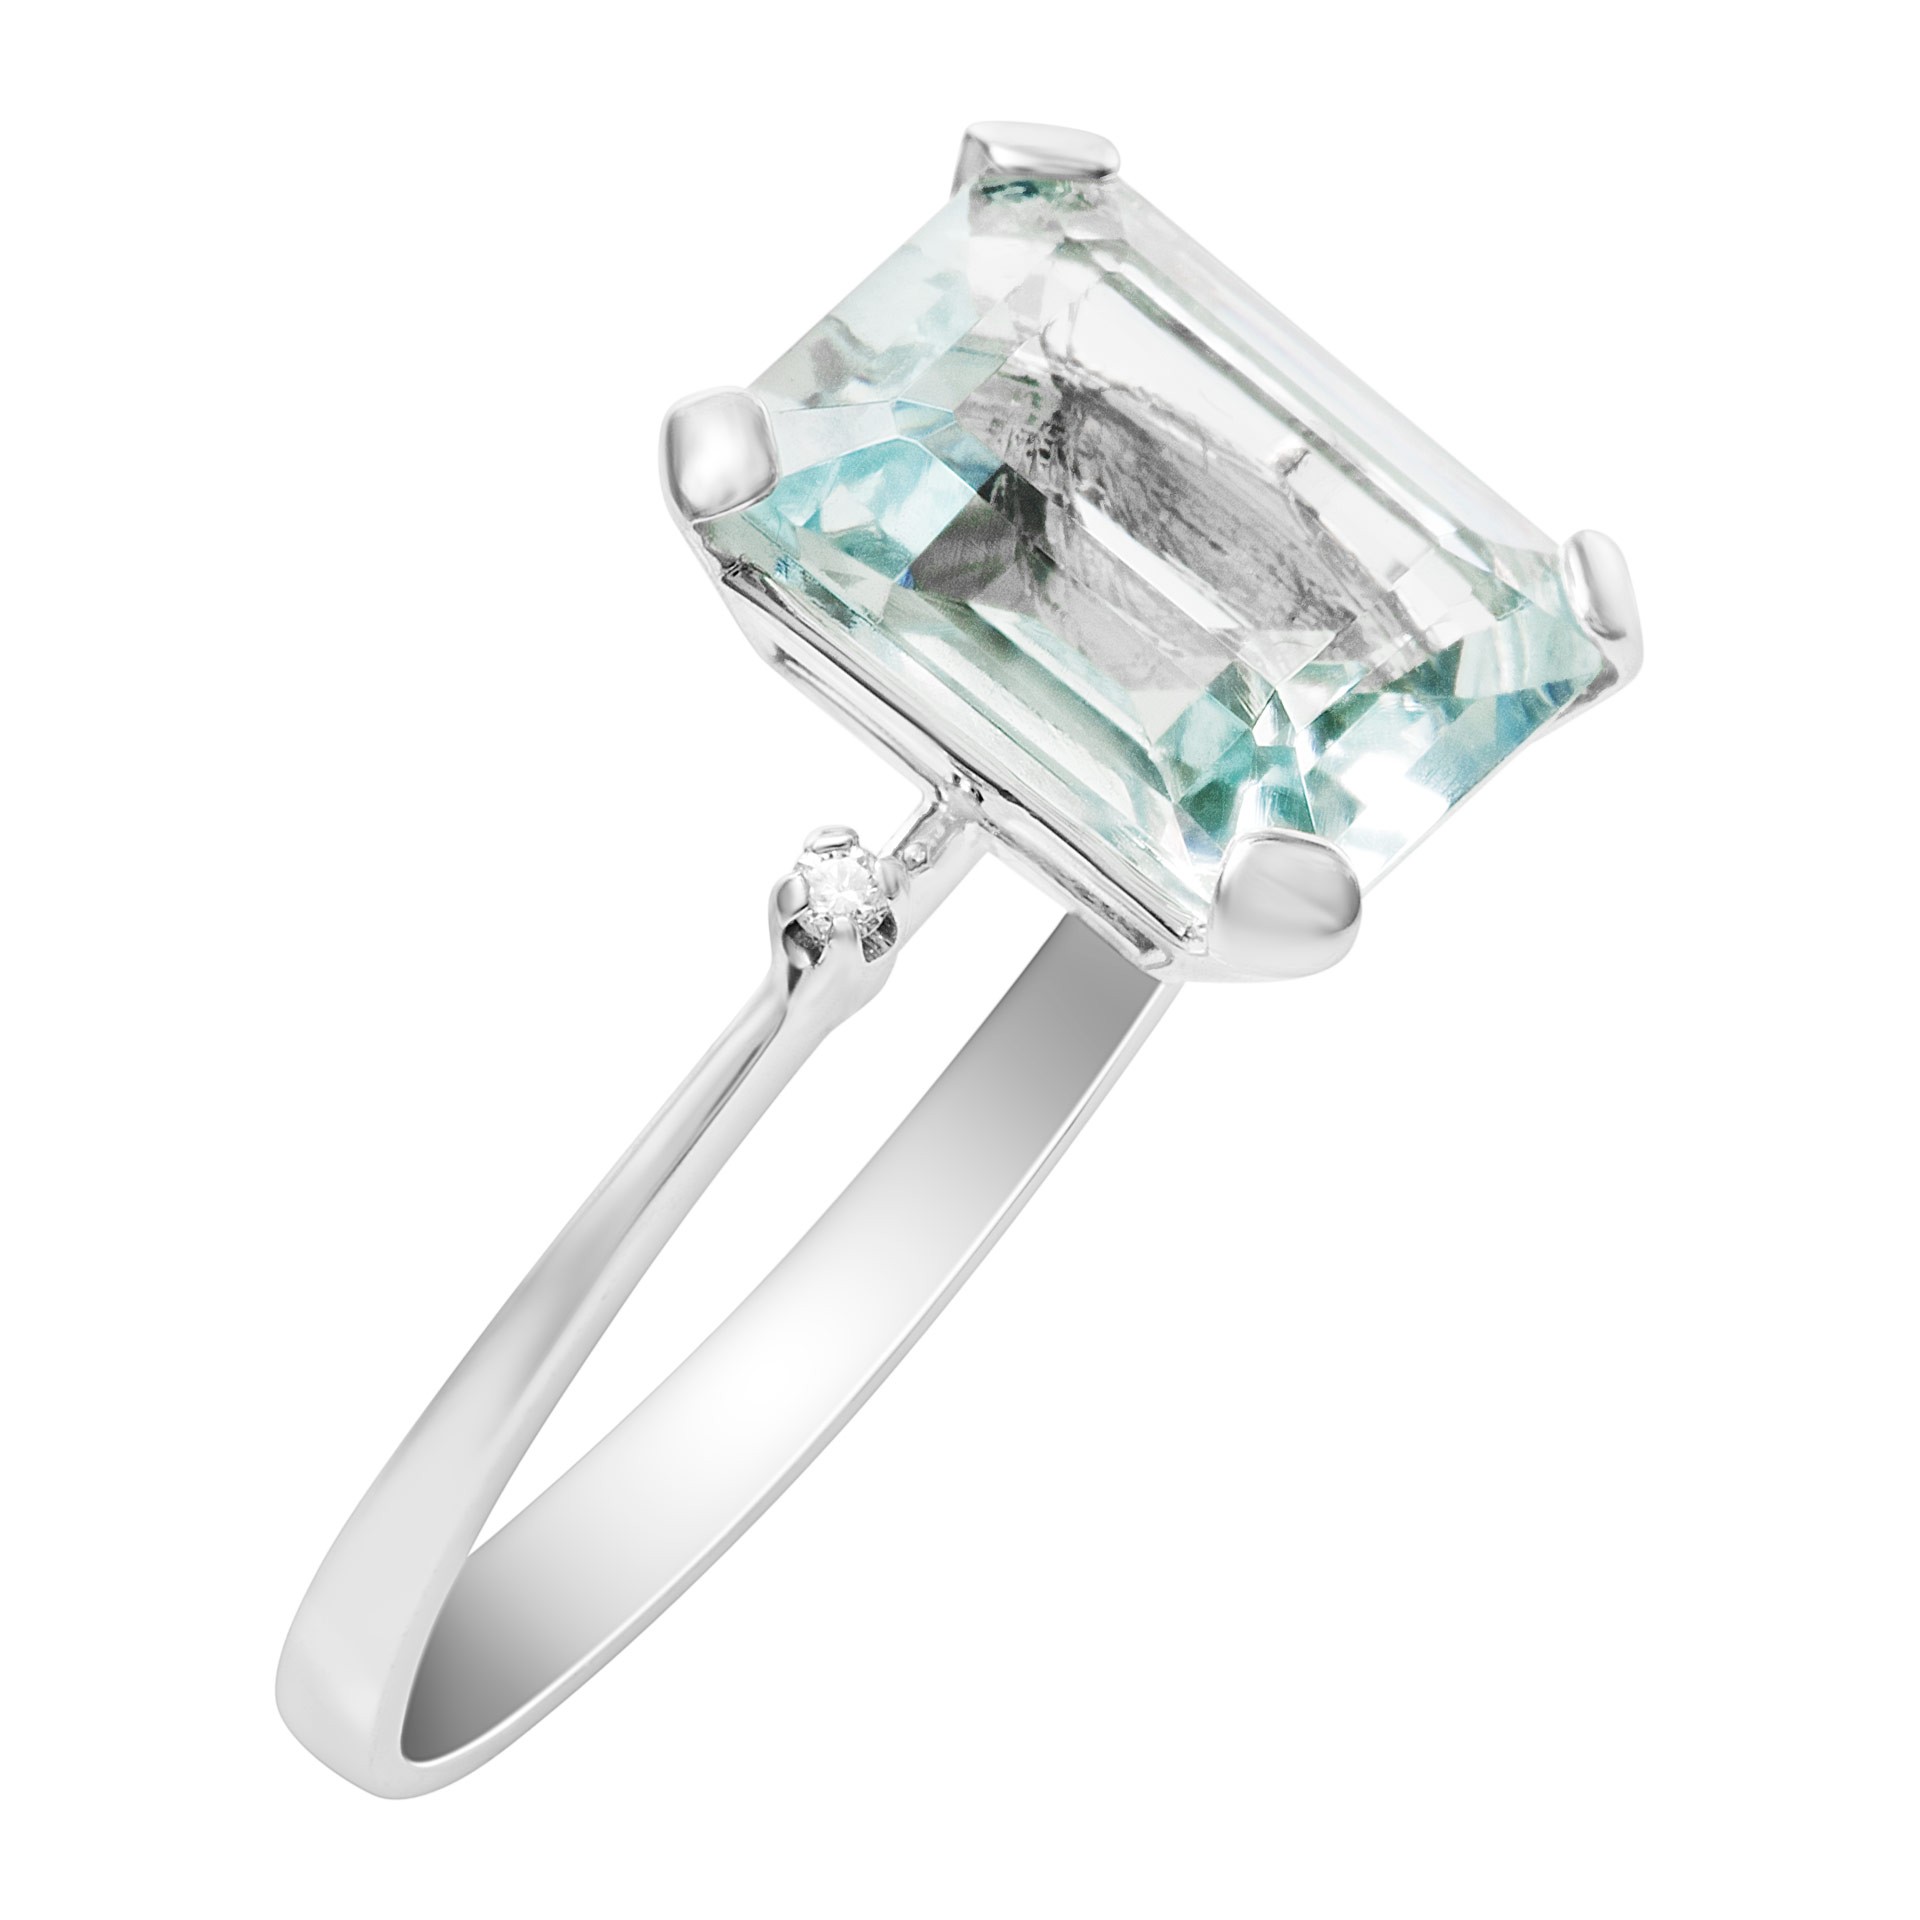 Fine Jewelry for Less than $1000: White gold, diamond, and aquamarine ring